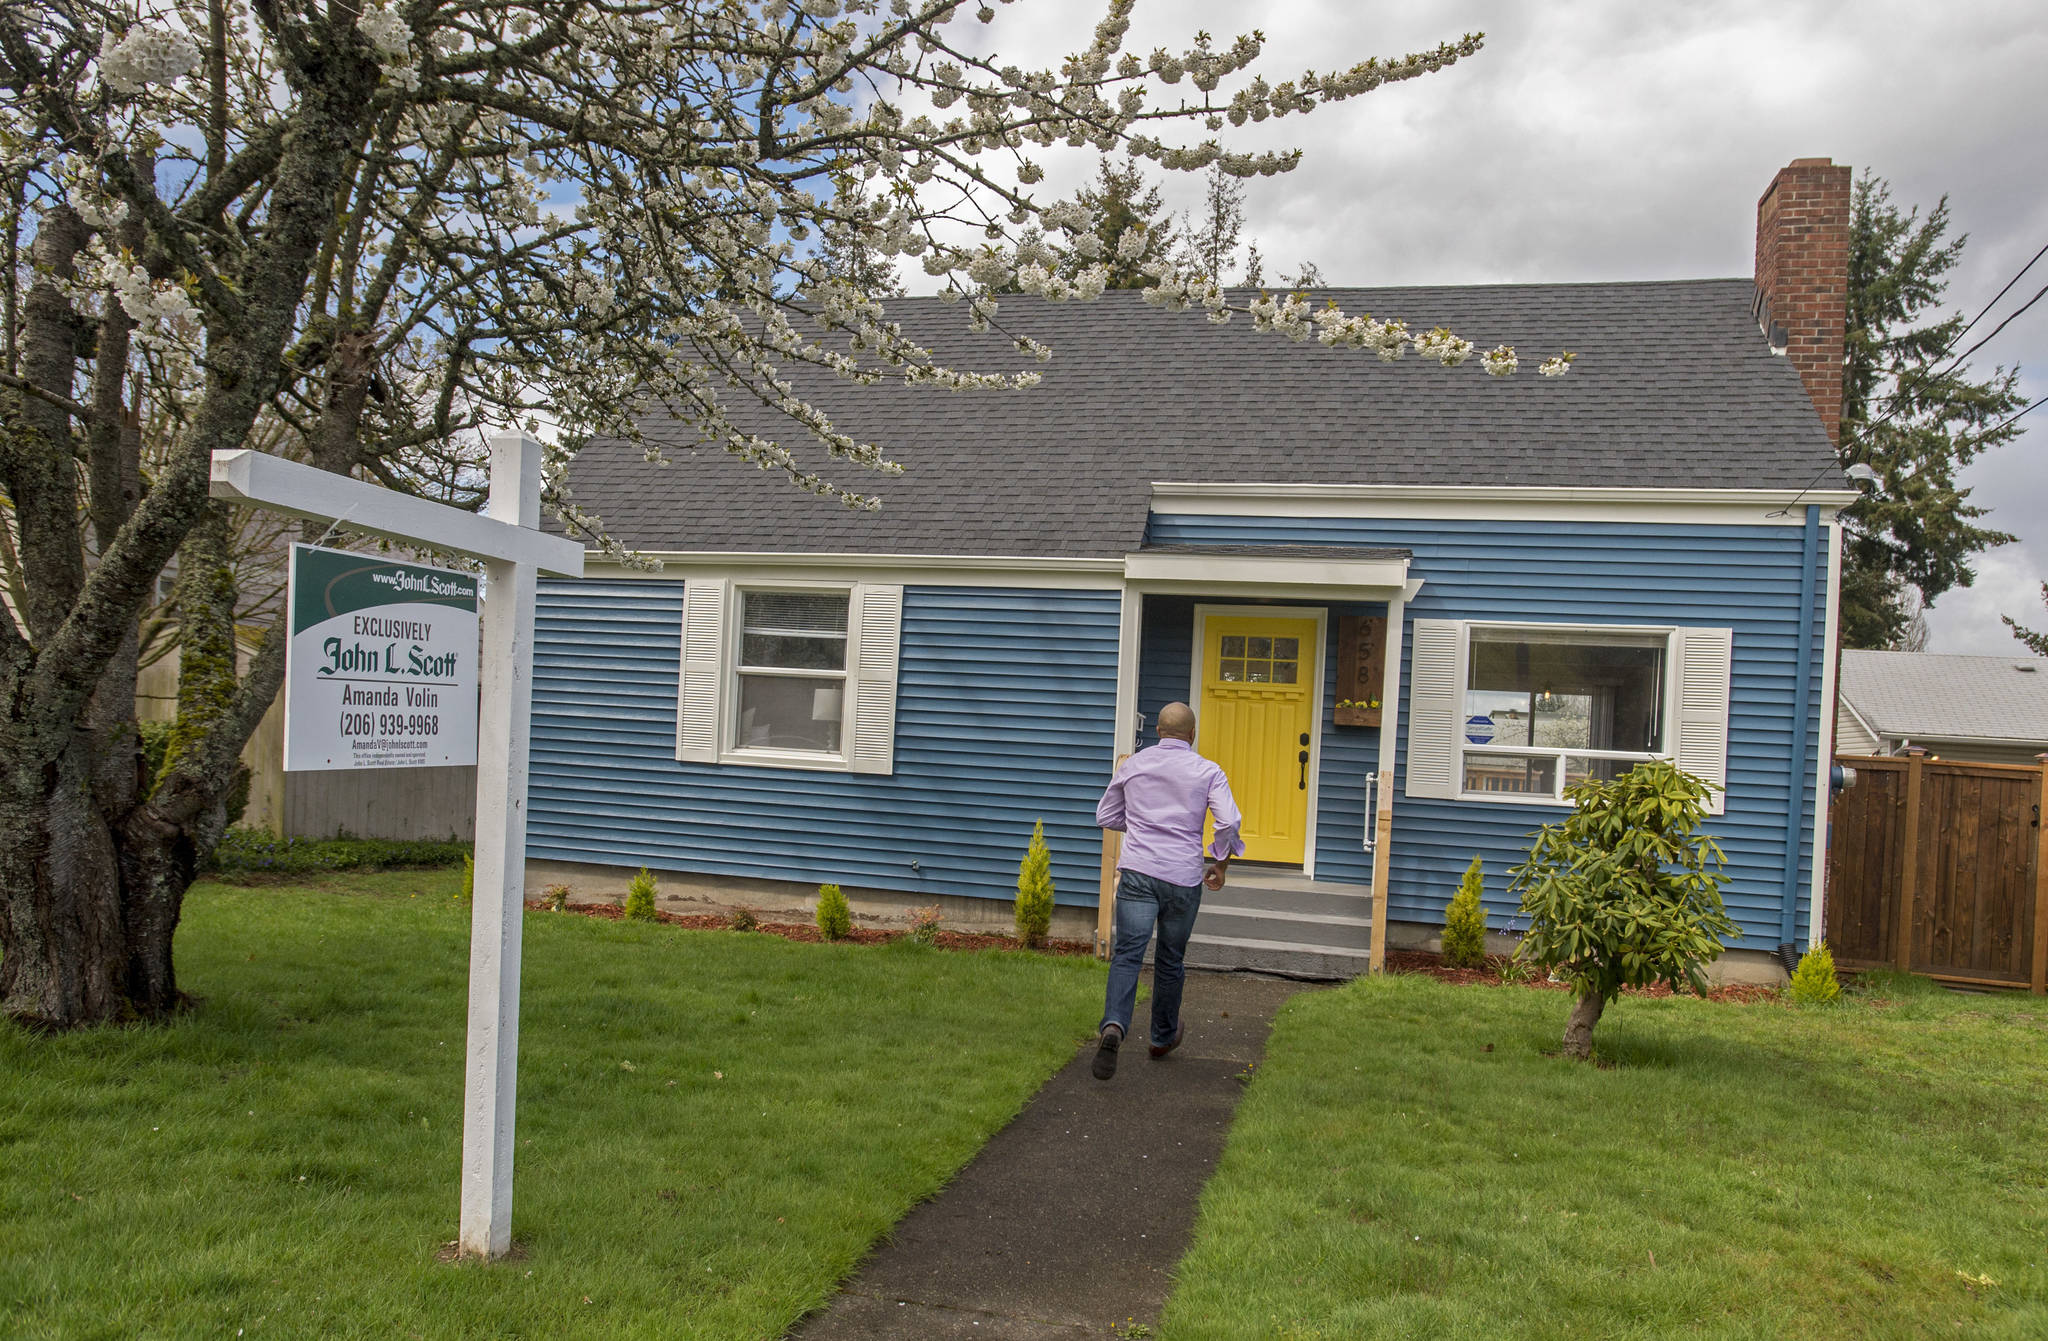 Real estate broker James Pitts III walks up to the fully remodeled childhood home of serial murderer Ted Bundy in Tacoma. (Peter Haley/The News Tribune via AP)